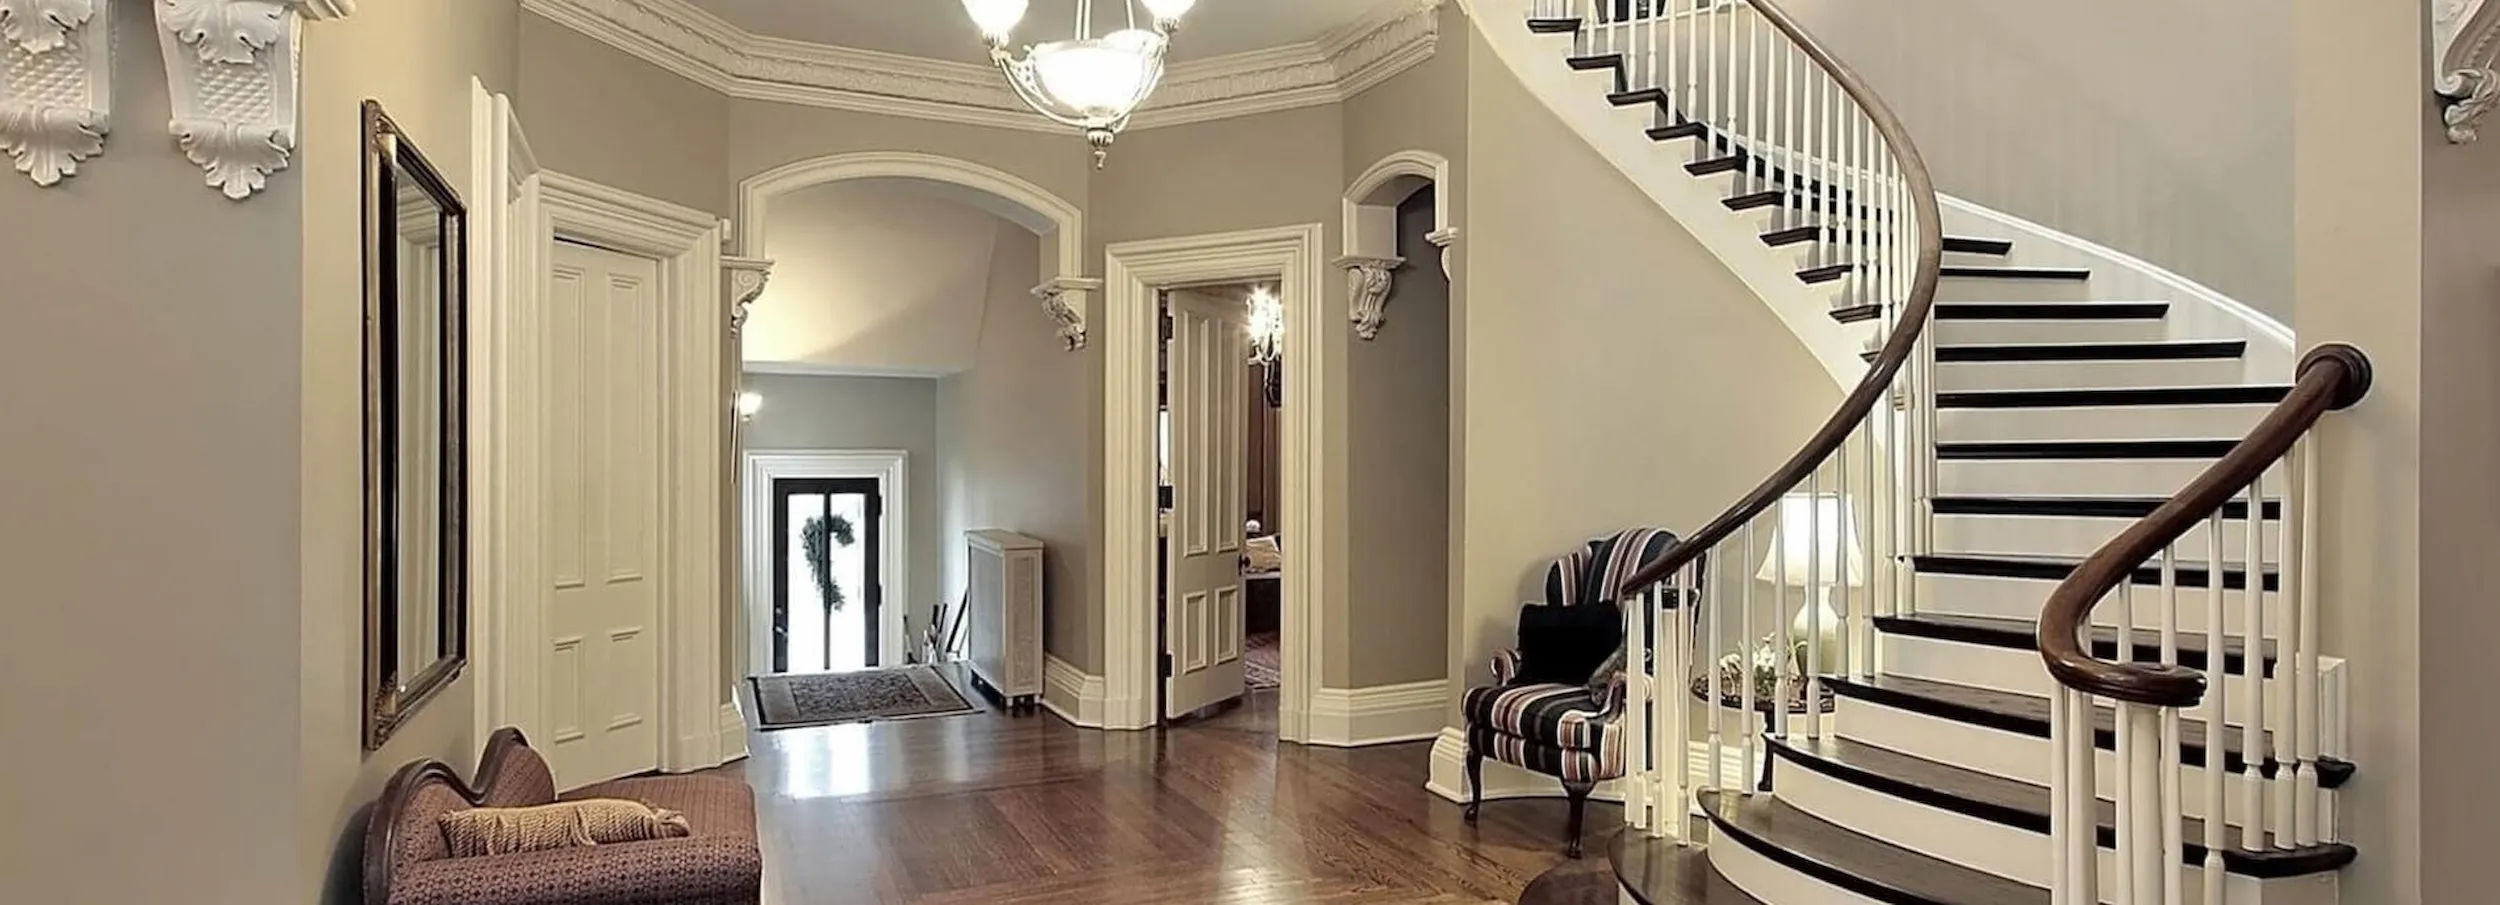 Stairwell in a foyer featuring hardwood floors and seating areas.